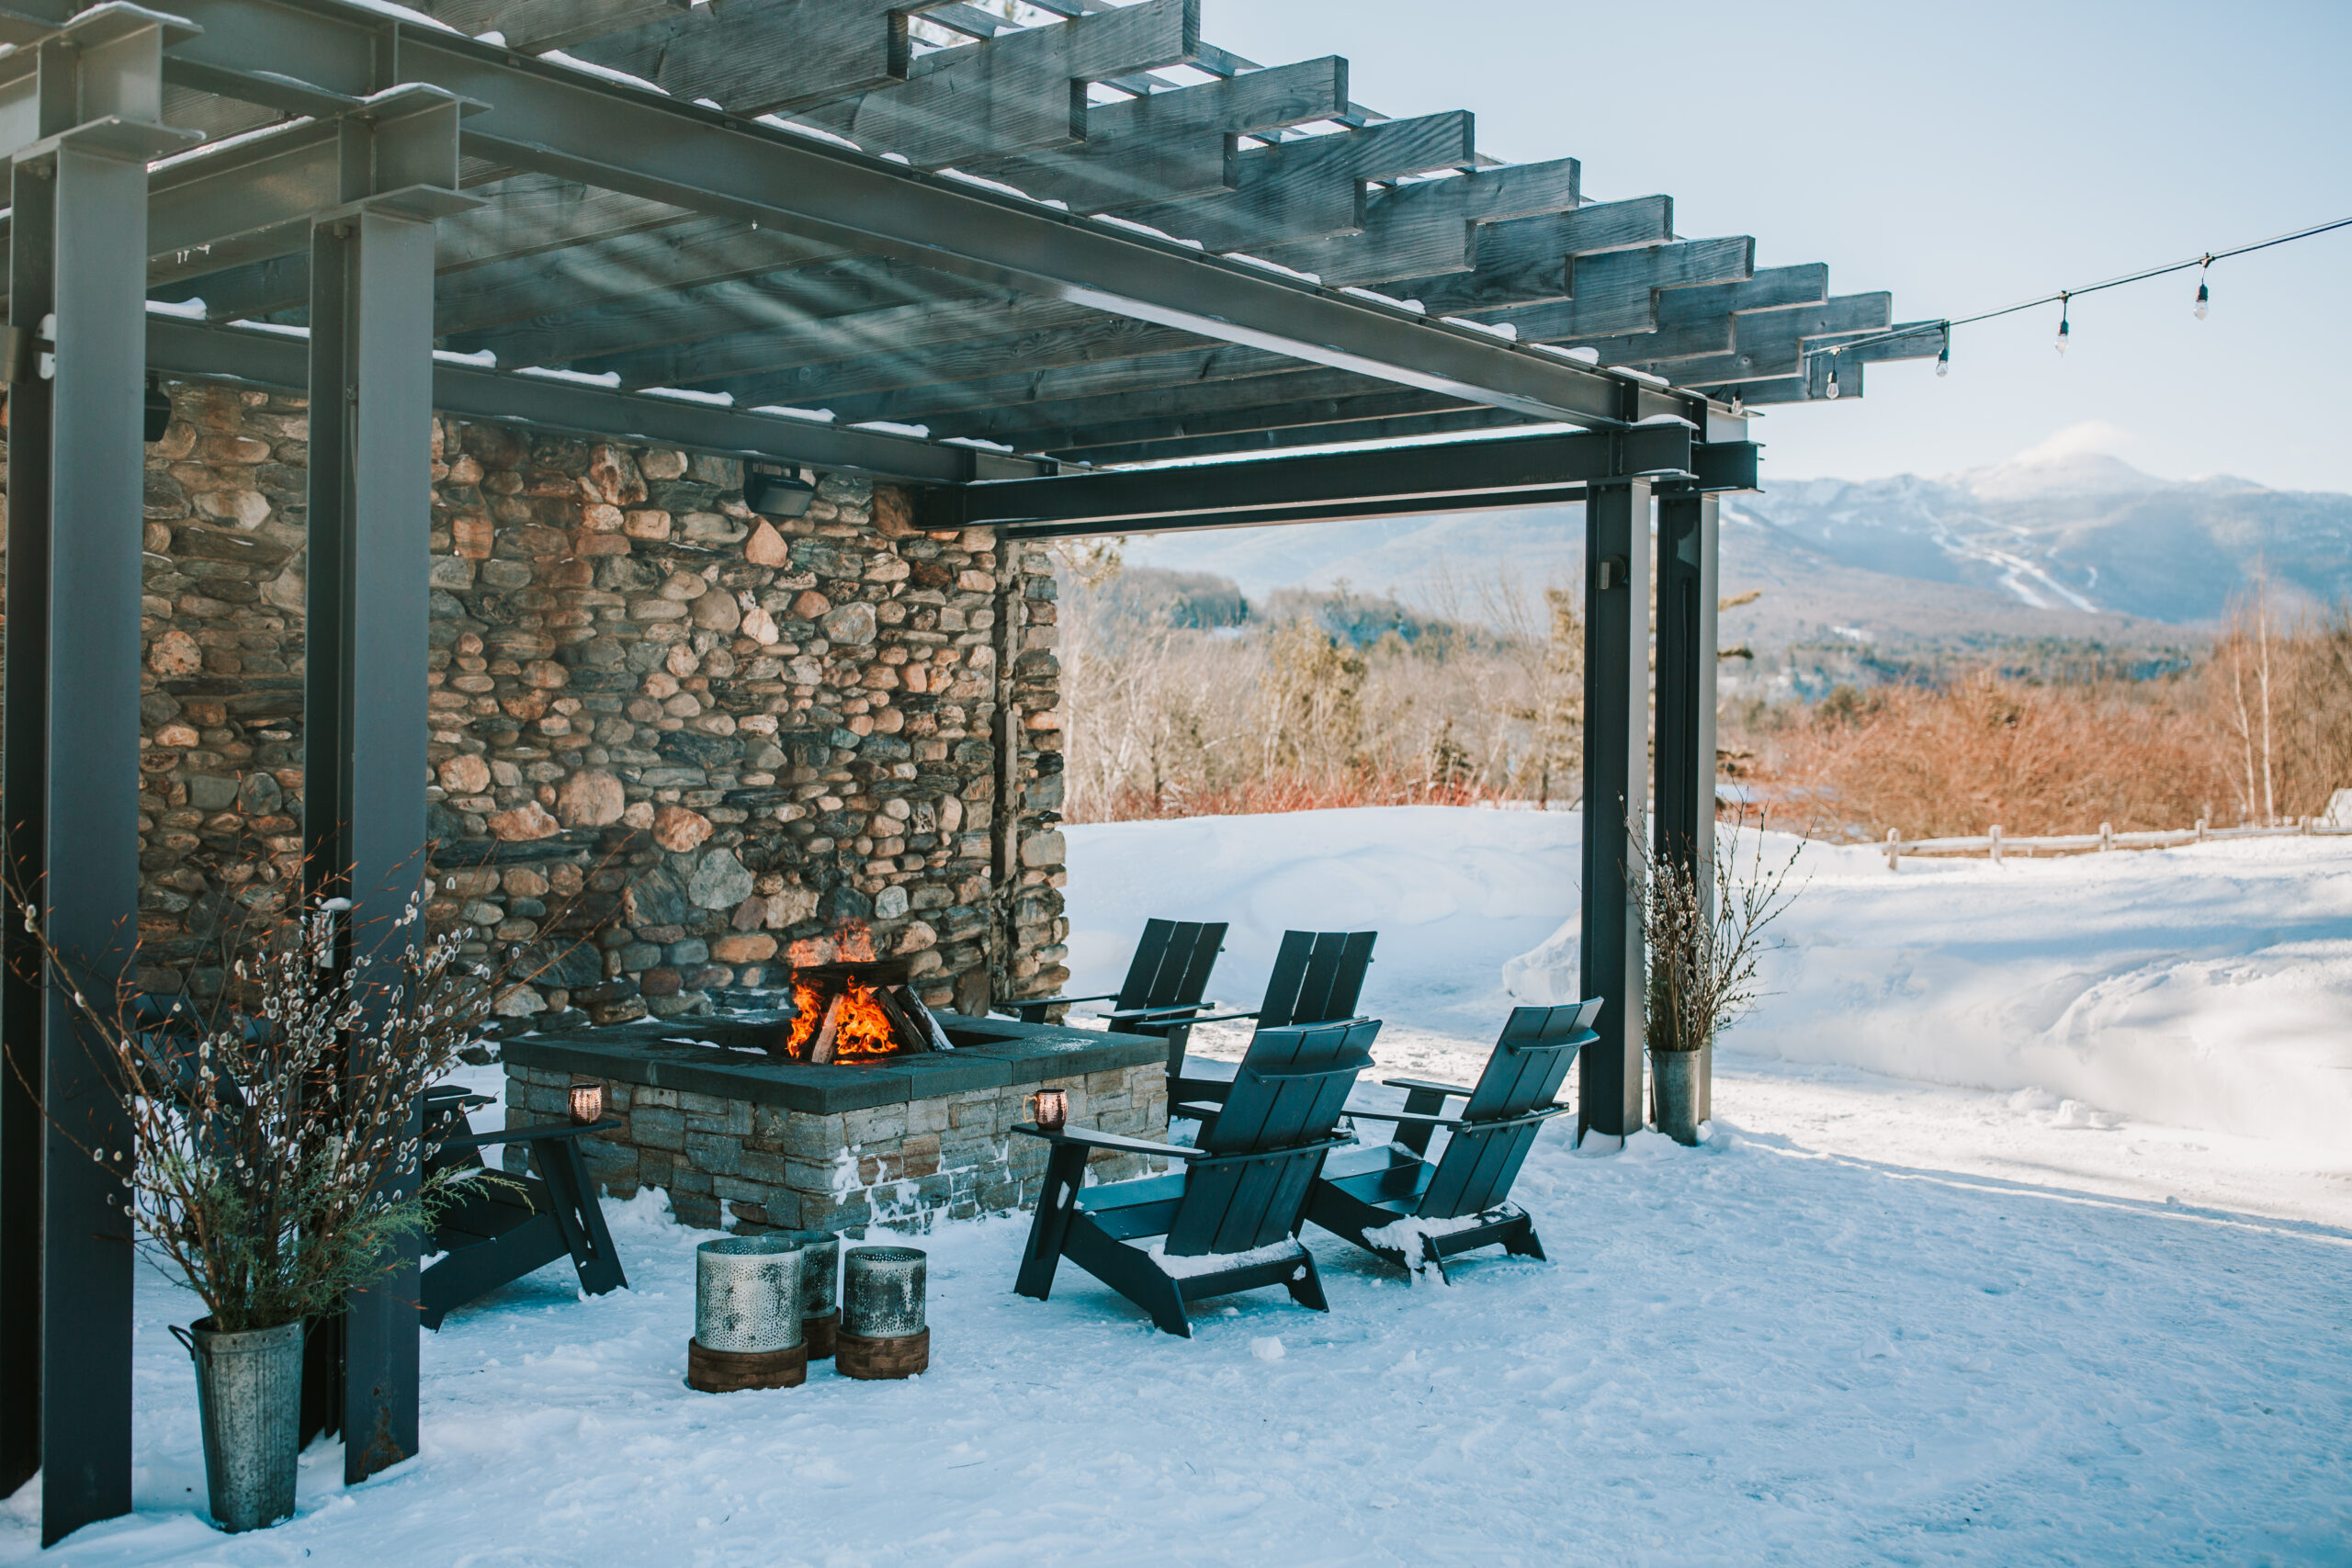 Black Friday travel deals at Topnotch Resort in Stowe, Vermont